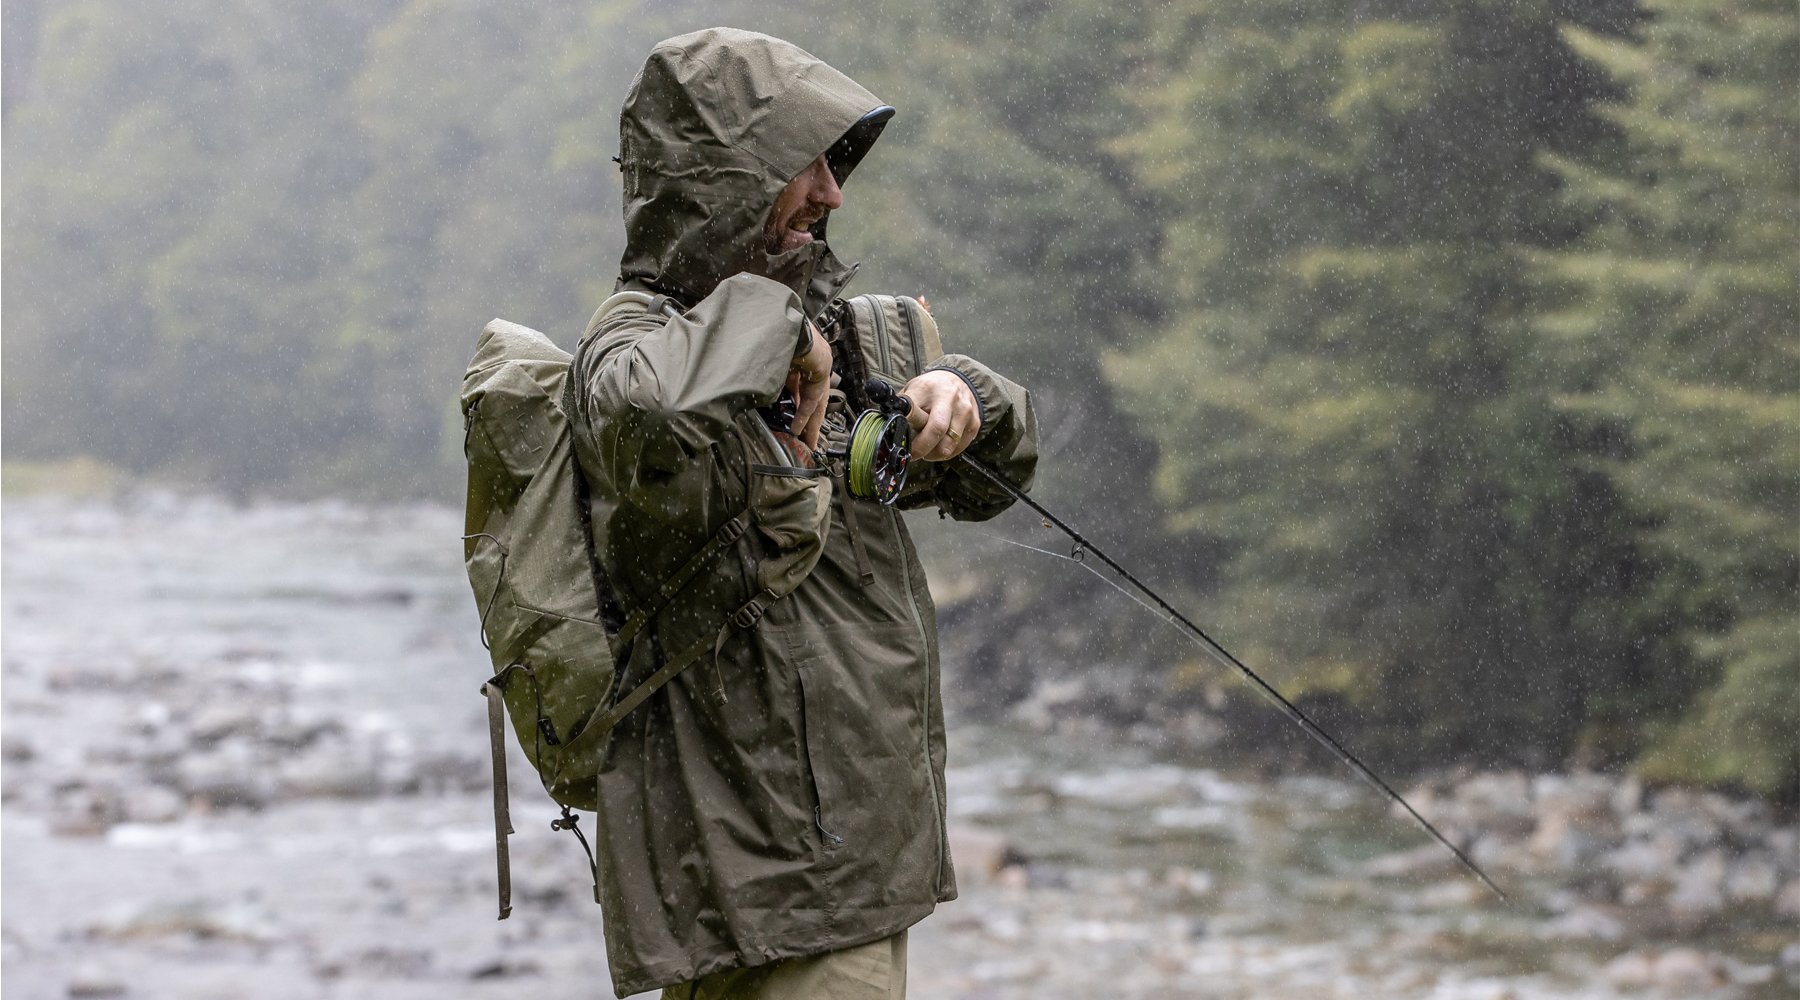 Fishing Jackets and Rainwear by Simms Fishing Products and Patagonia.